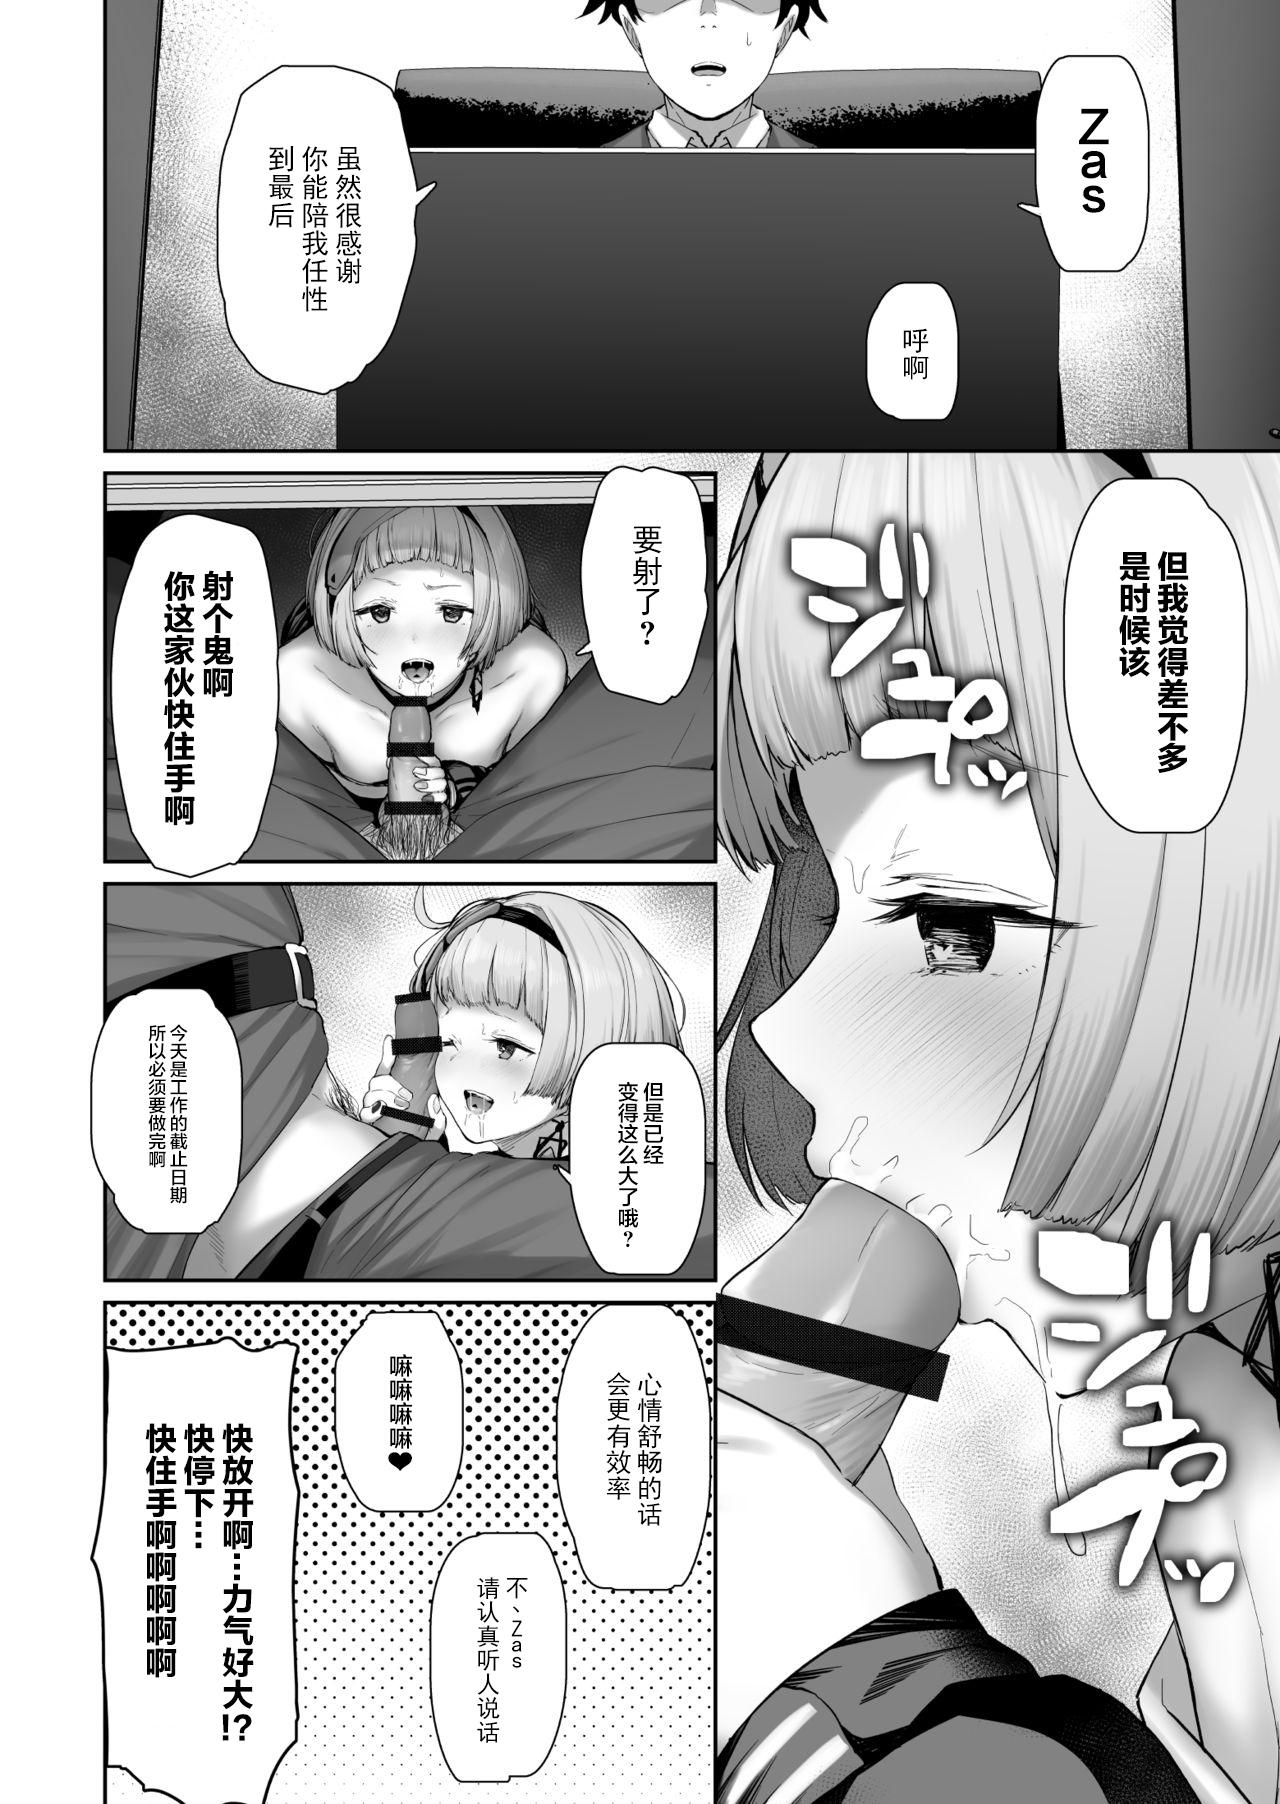 Bj Zas M21 - Girls frontline Bisexual - Page 18